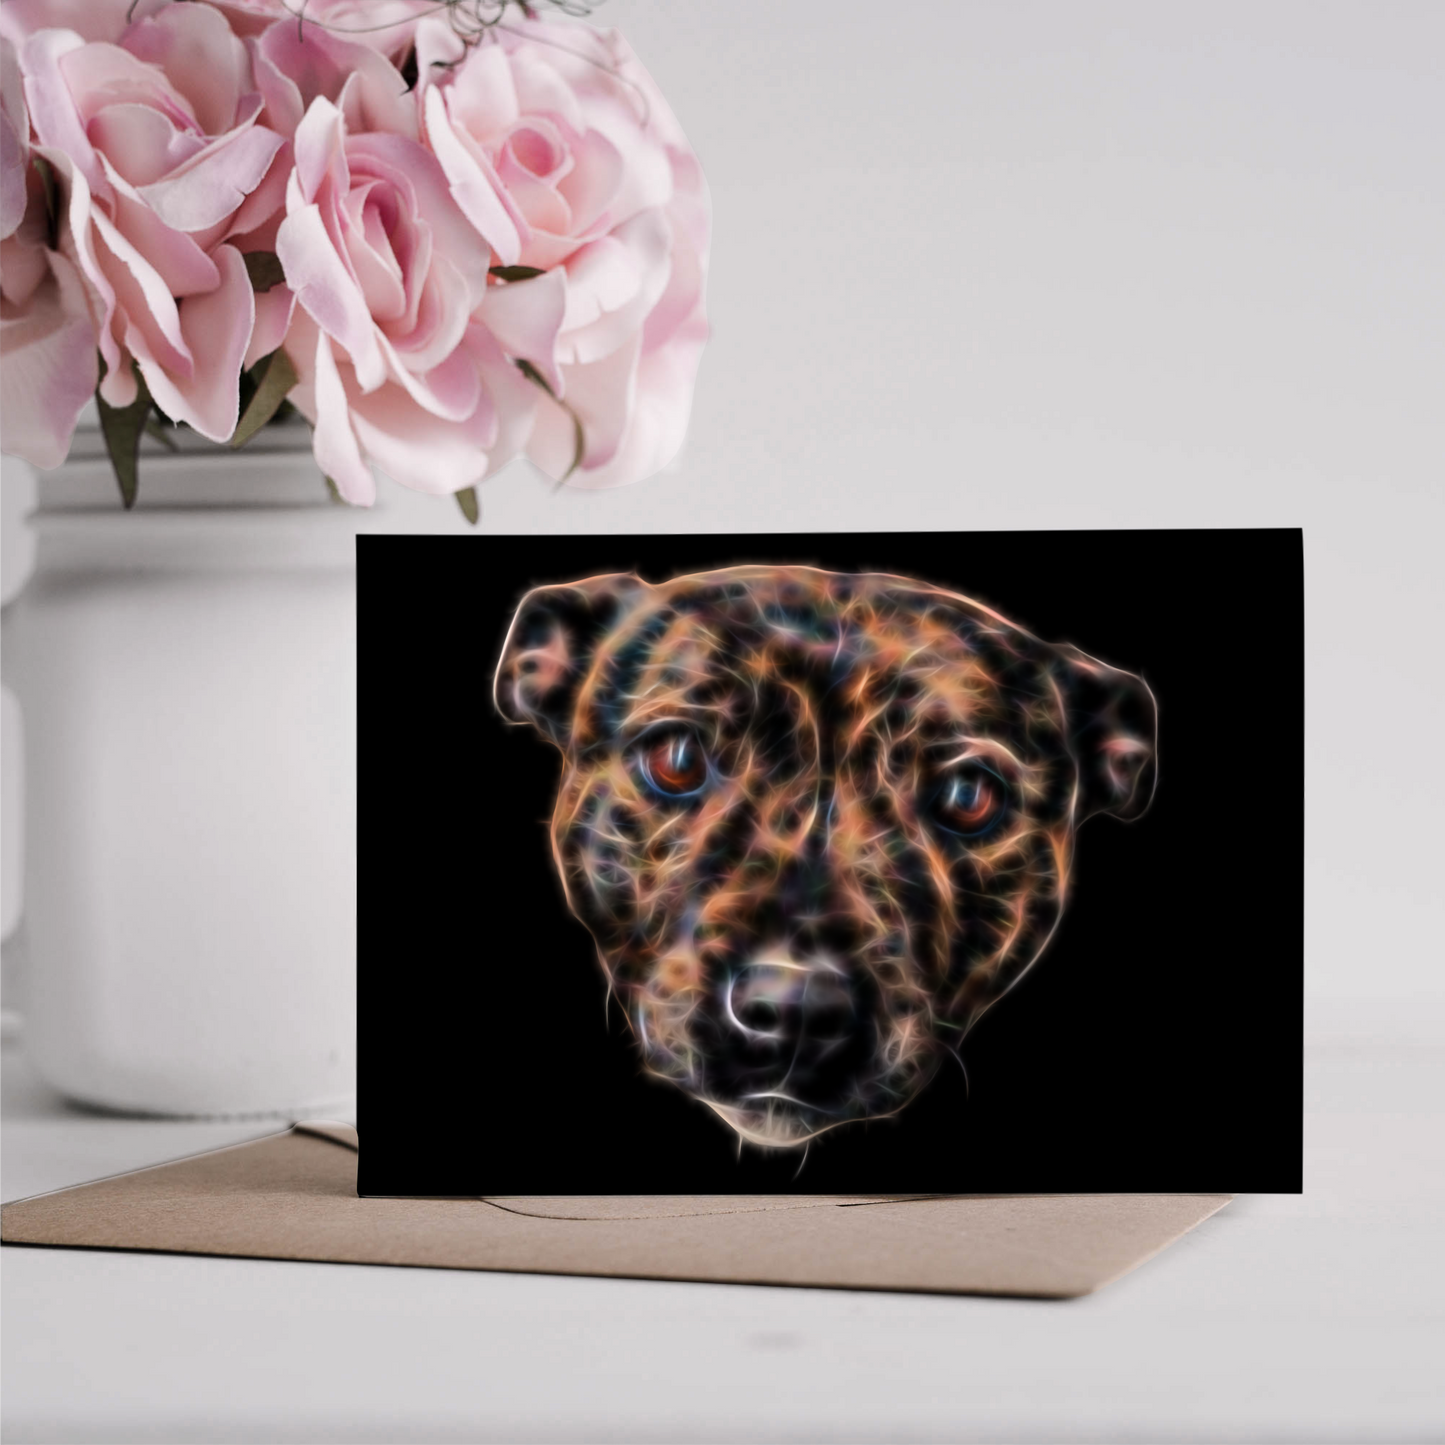 Brindle Staffordshire Bull Terrier  Greeting Card Blank Inside for Birthdays or any other Occasion. Brindle Staffy Card